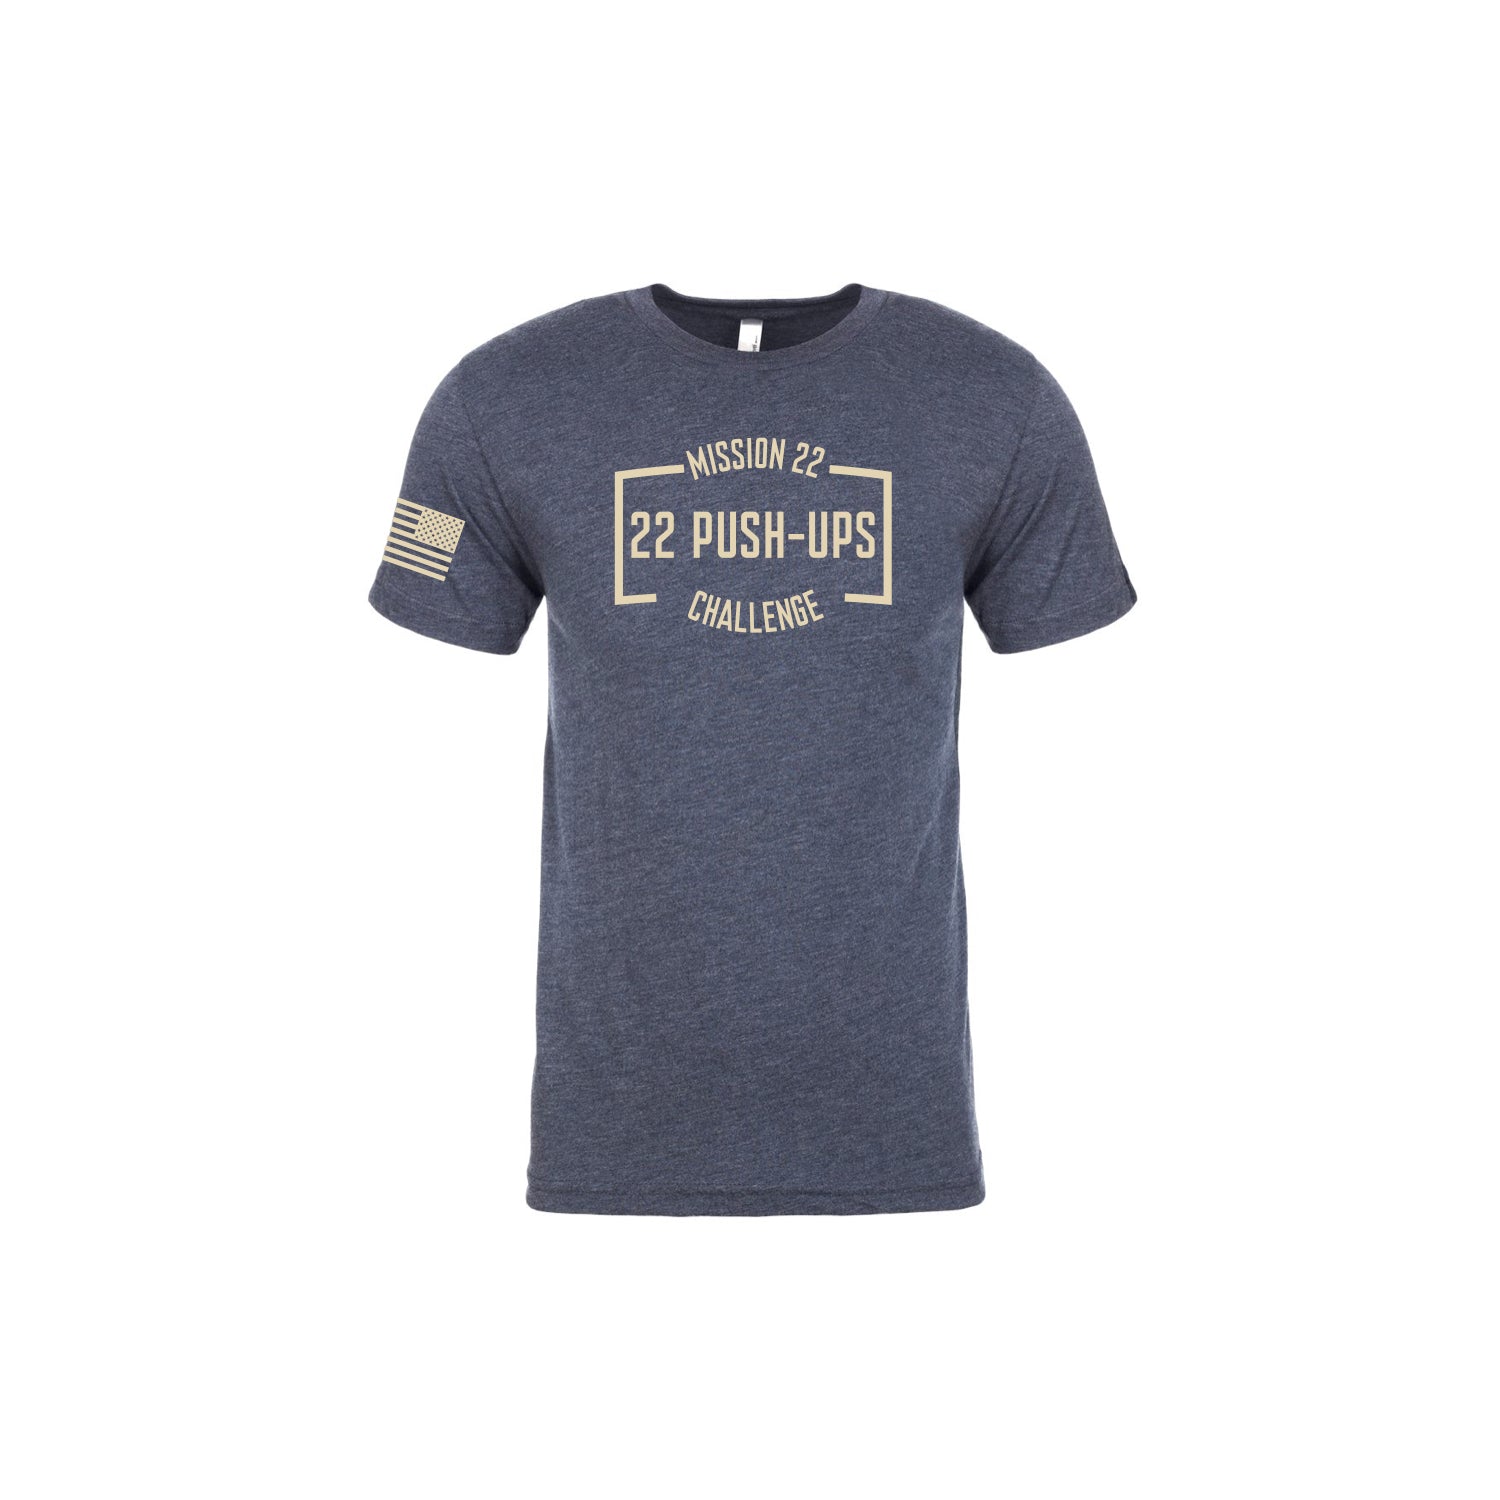 Product Image of Mission 22 Push-Up Challenge Tee #1